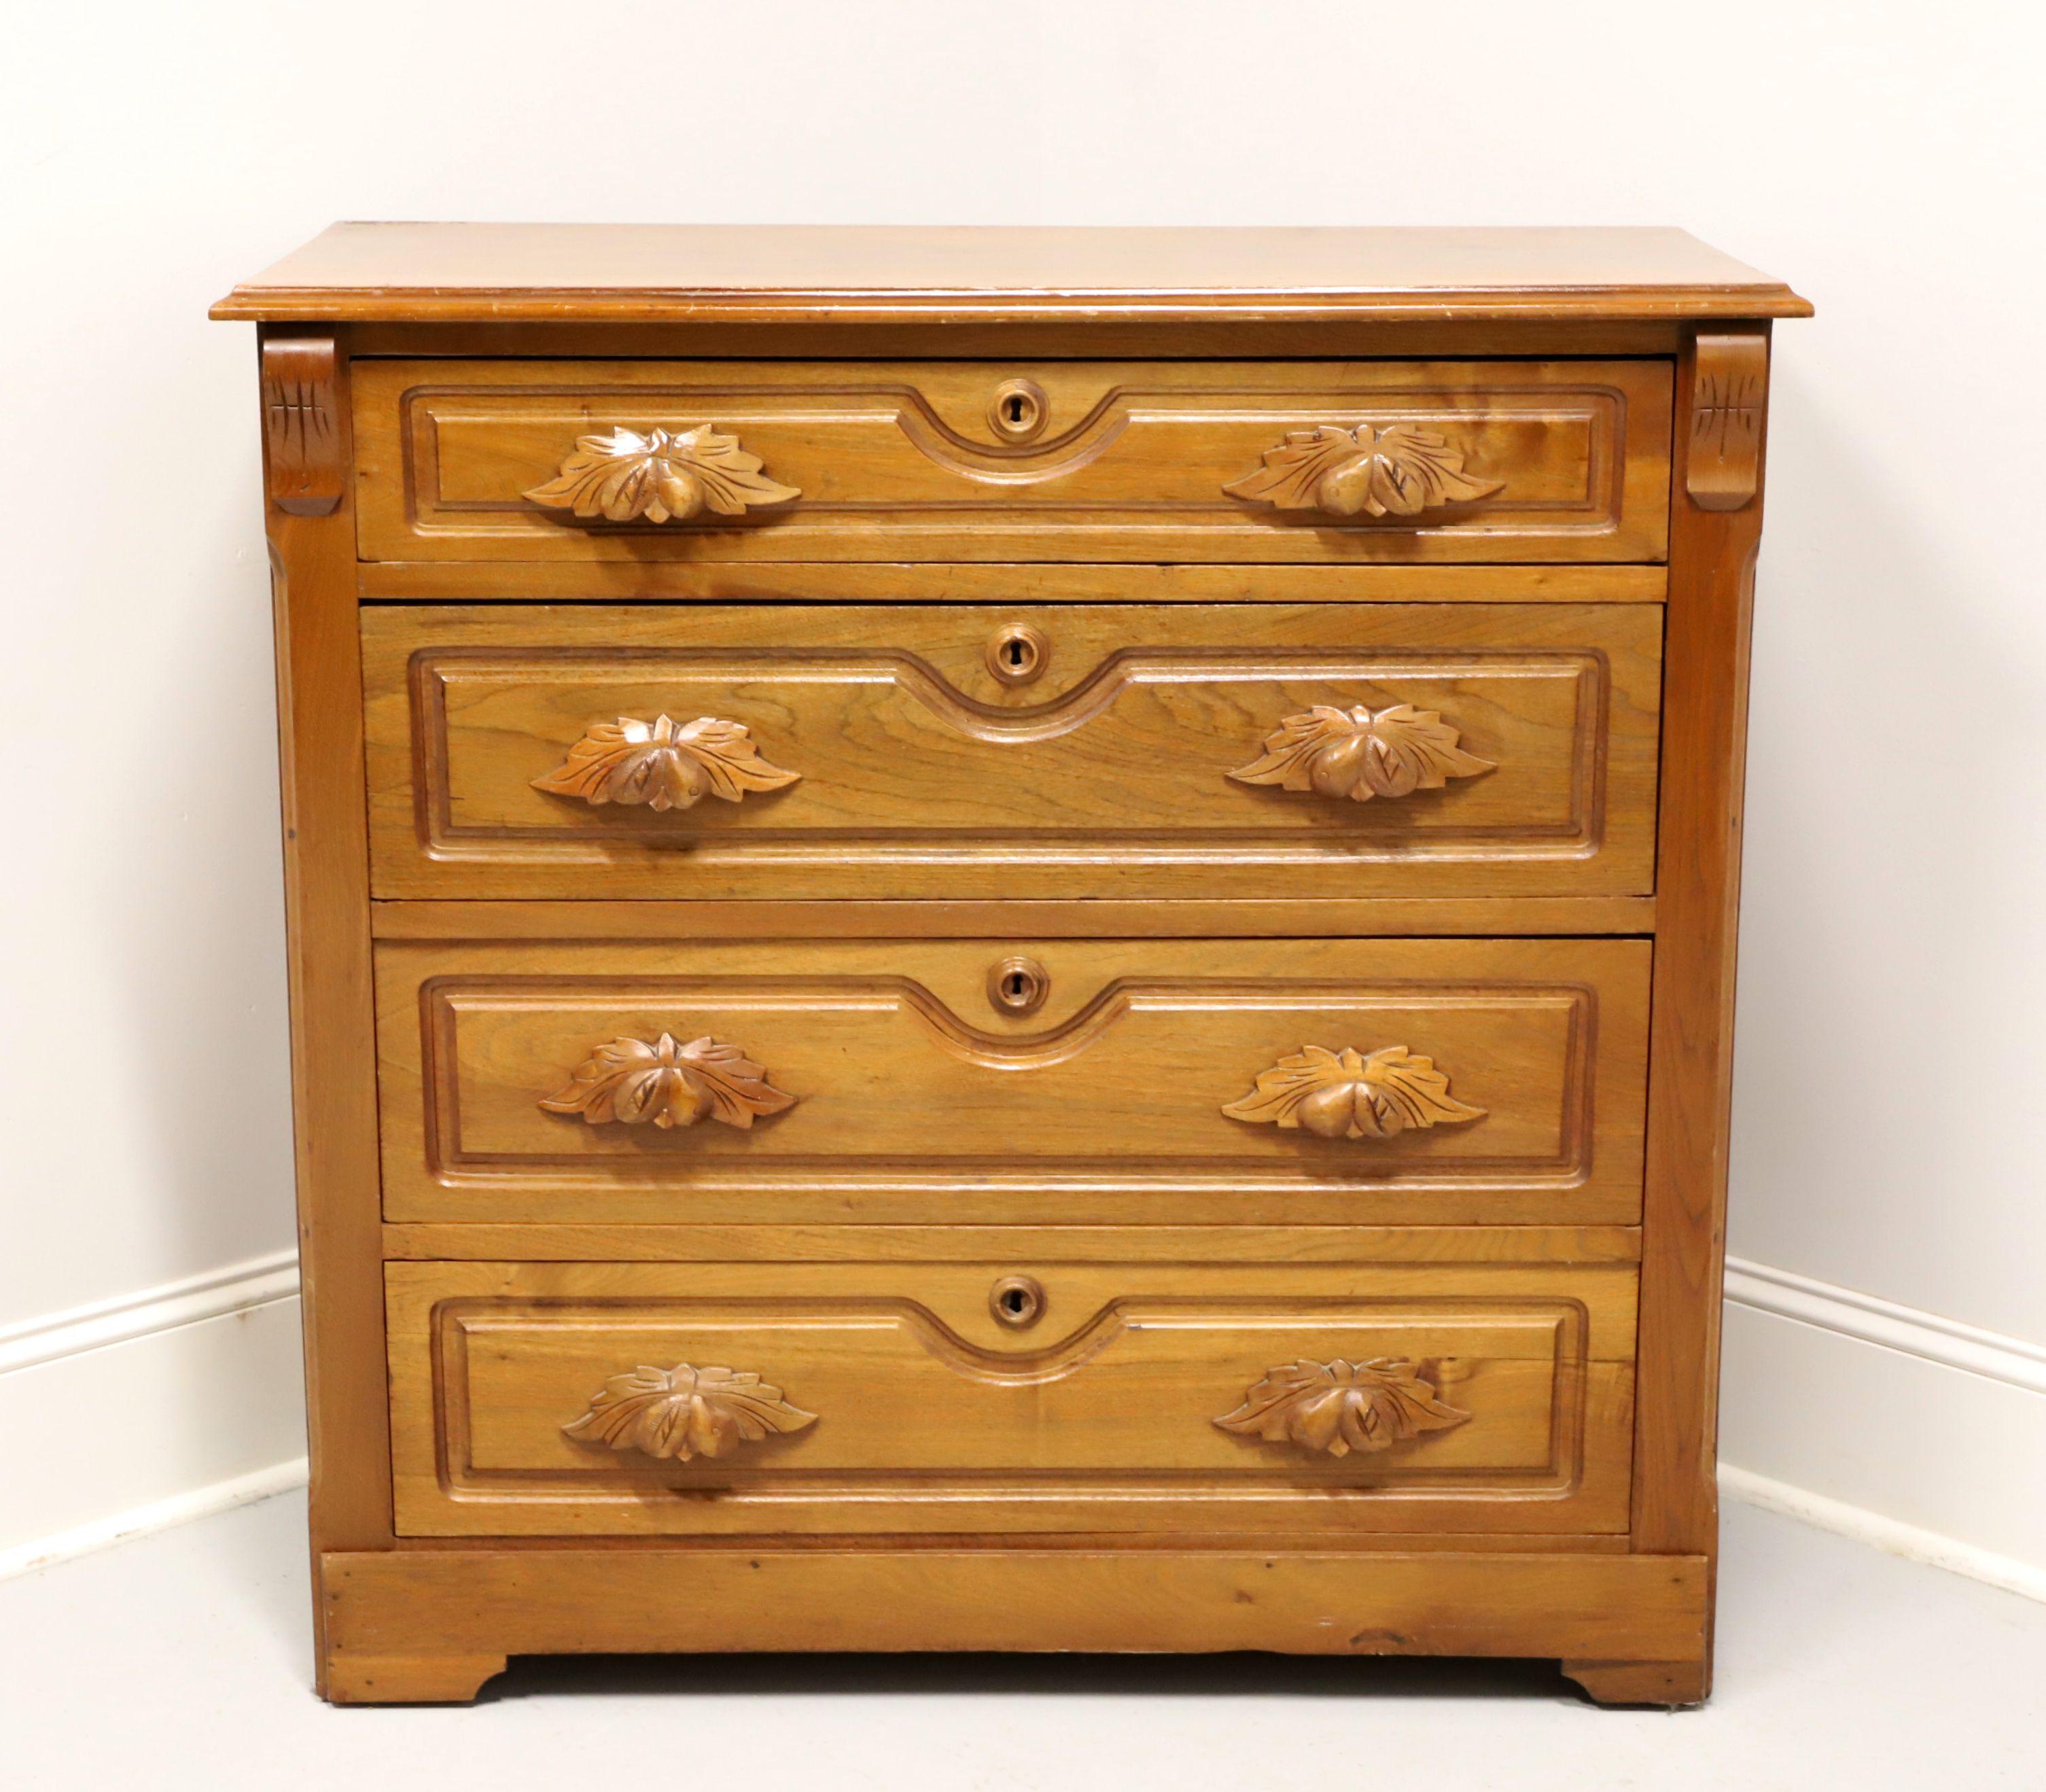 An antique Victorian style four-drawer chest, unbranded. Walnut with a light color finish, decoratively carved handles, front corners & drawer fronts, wood keyhole escutcheons, and bracket feet. Features four drawers of dovetailed construction with